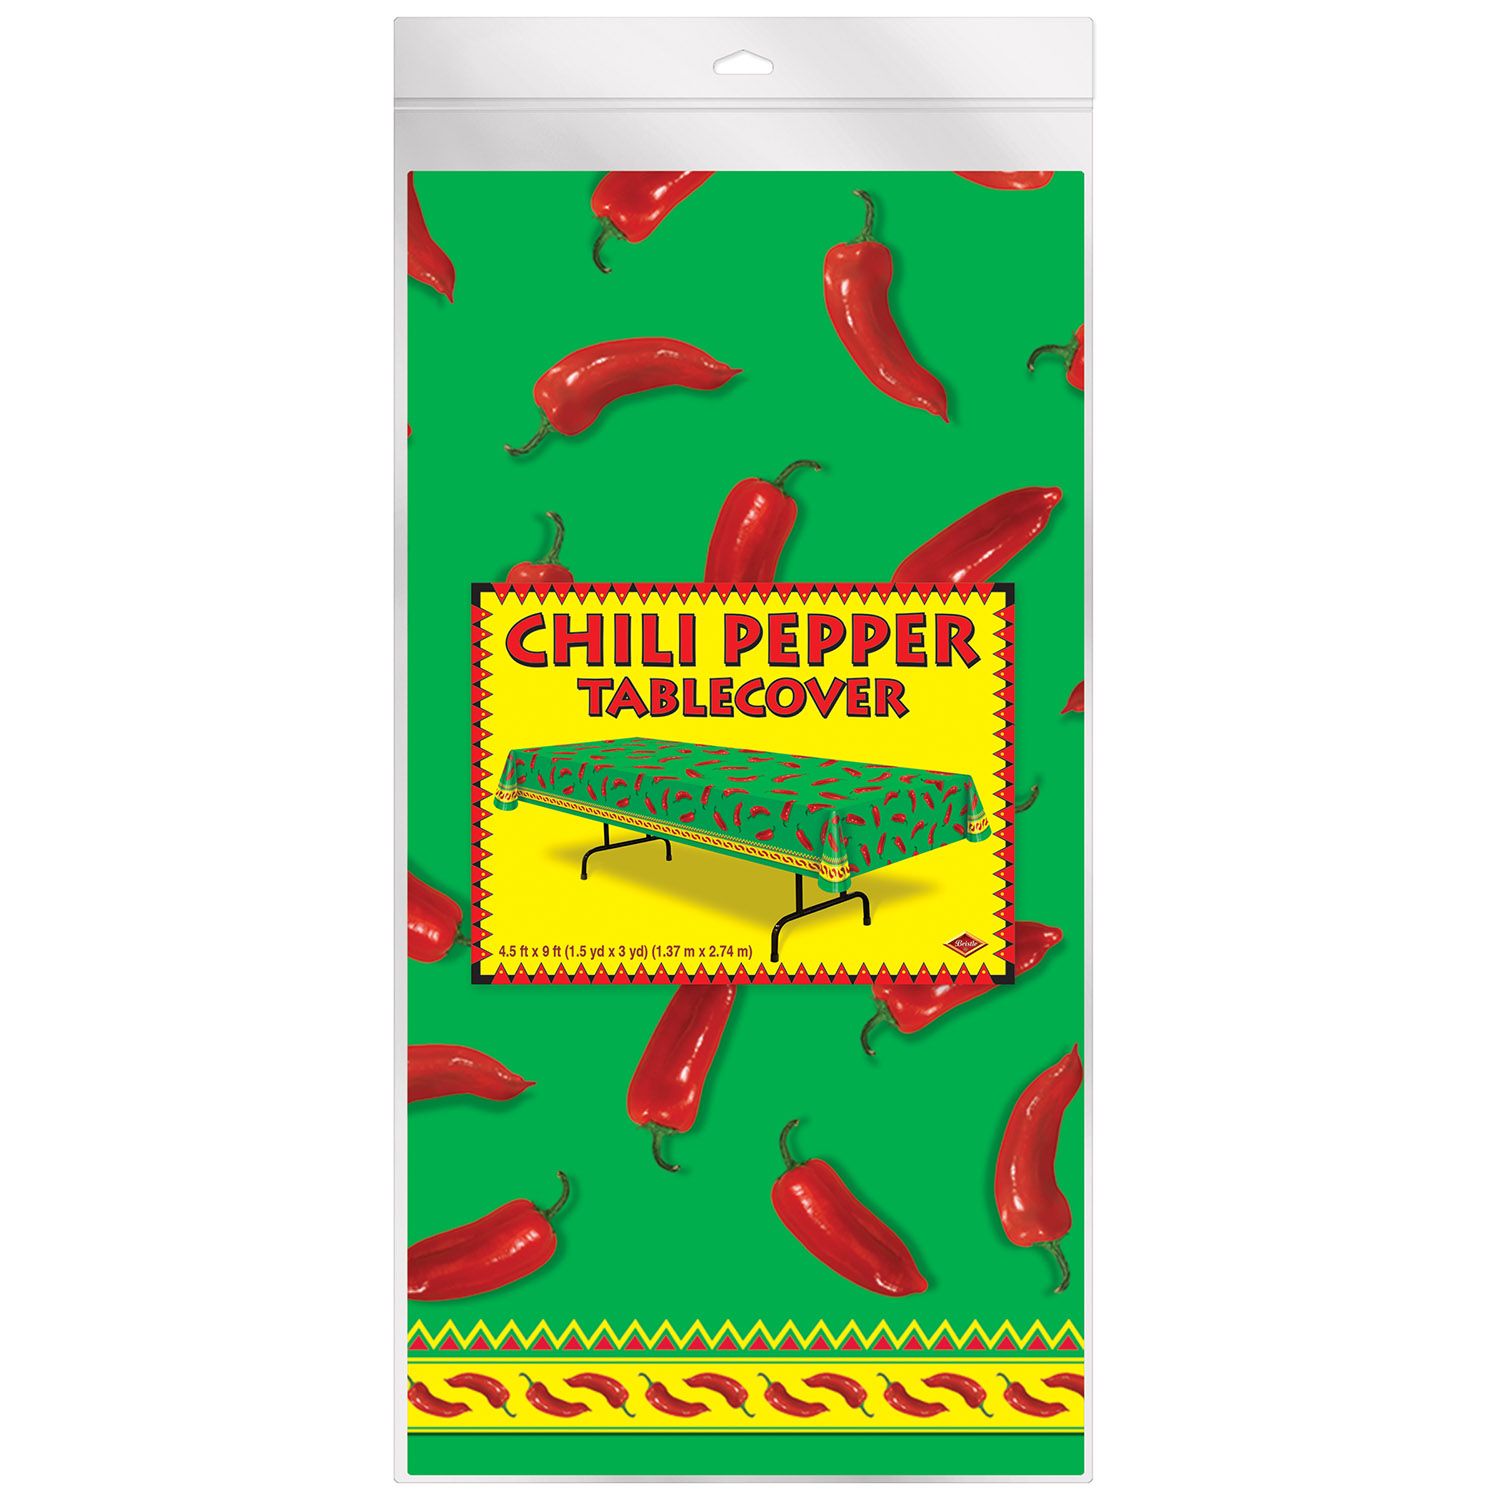 Chili Pepper Table Cover